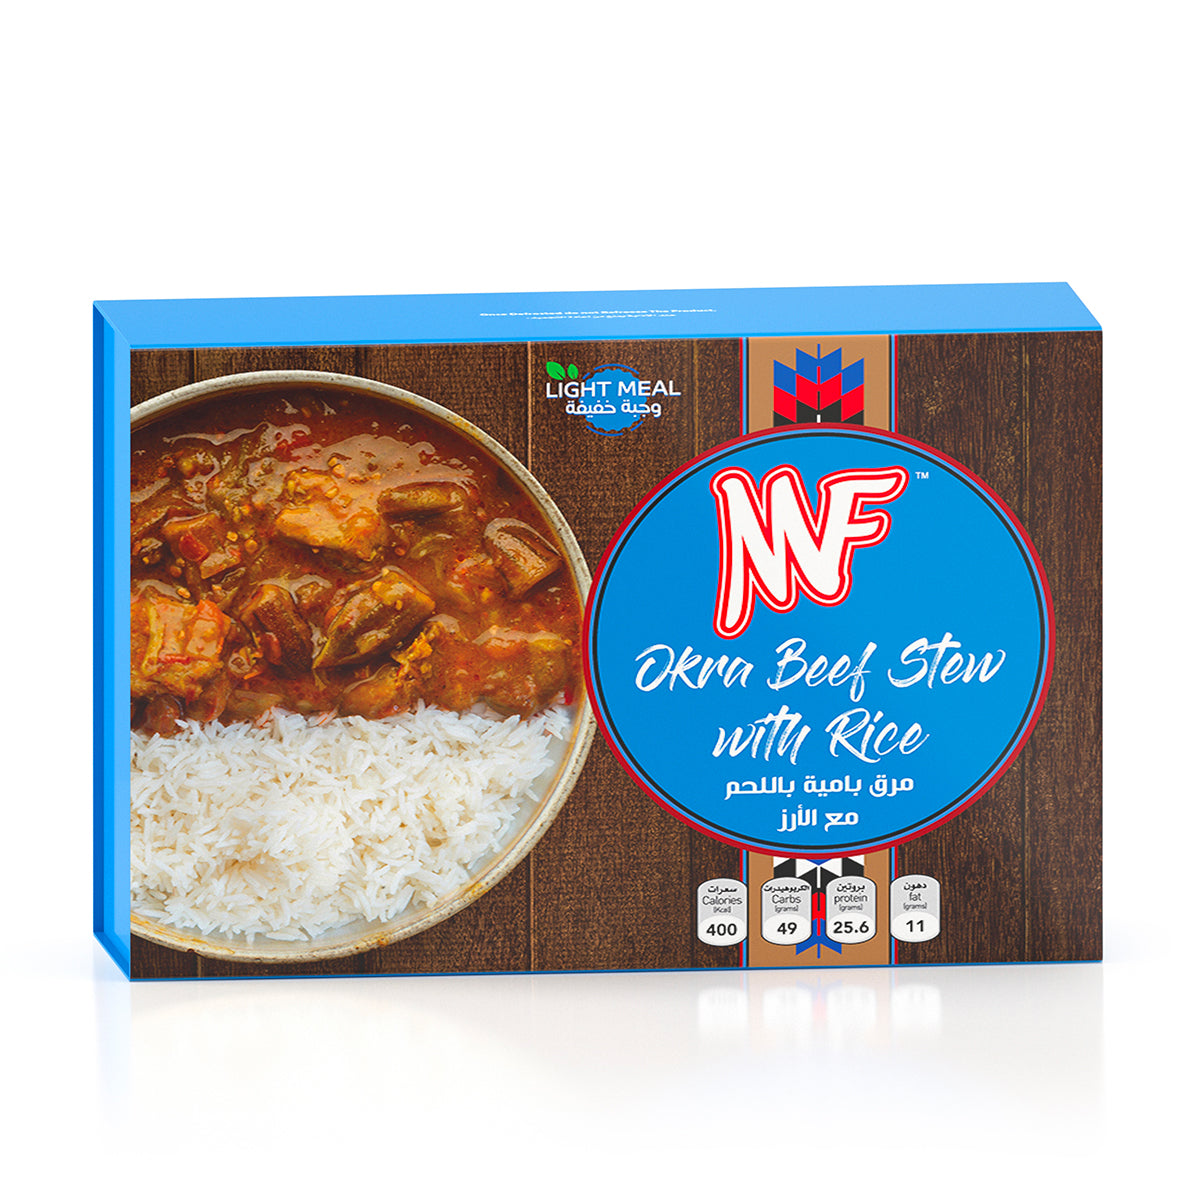 MF Okra Beef Stew with Rice 400g (Light Meal)